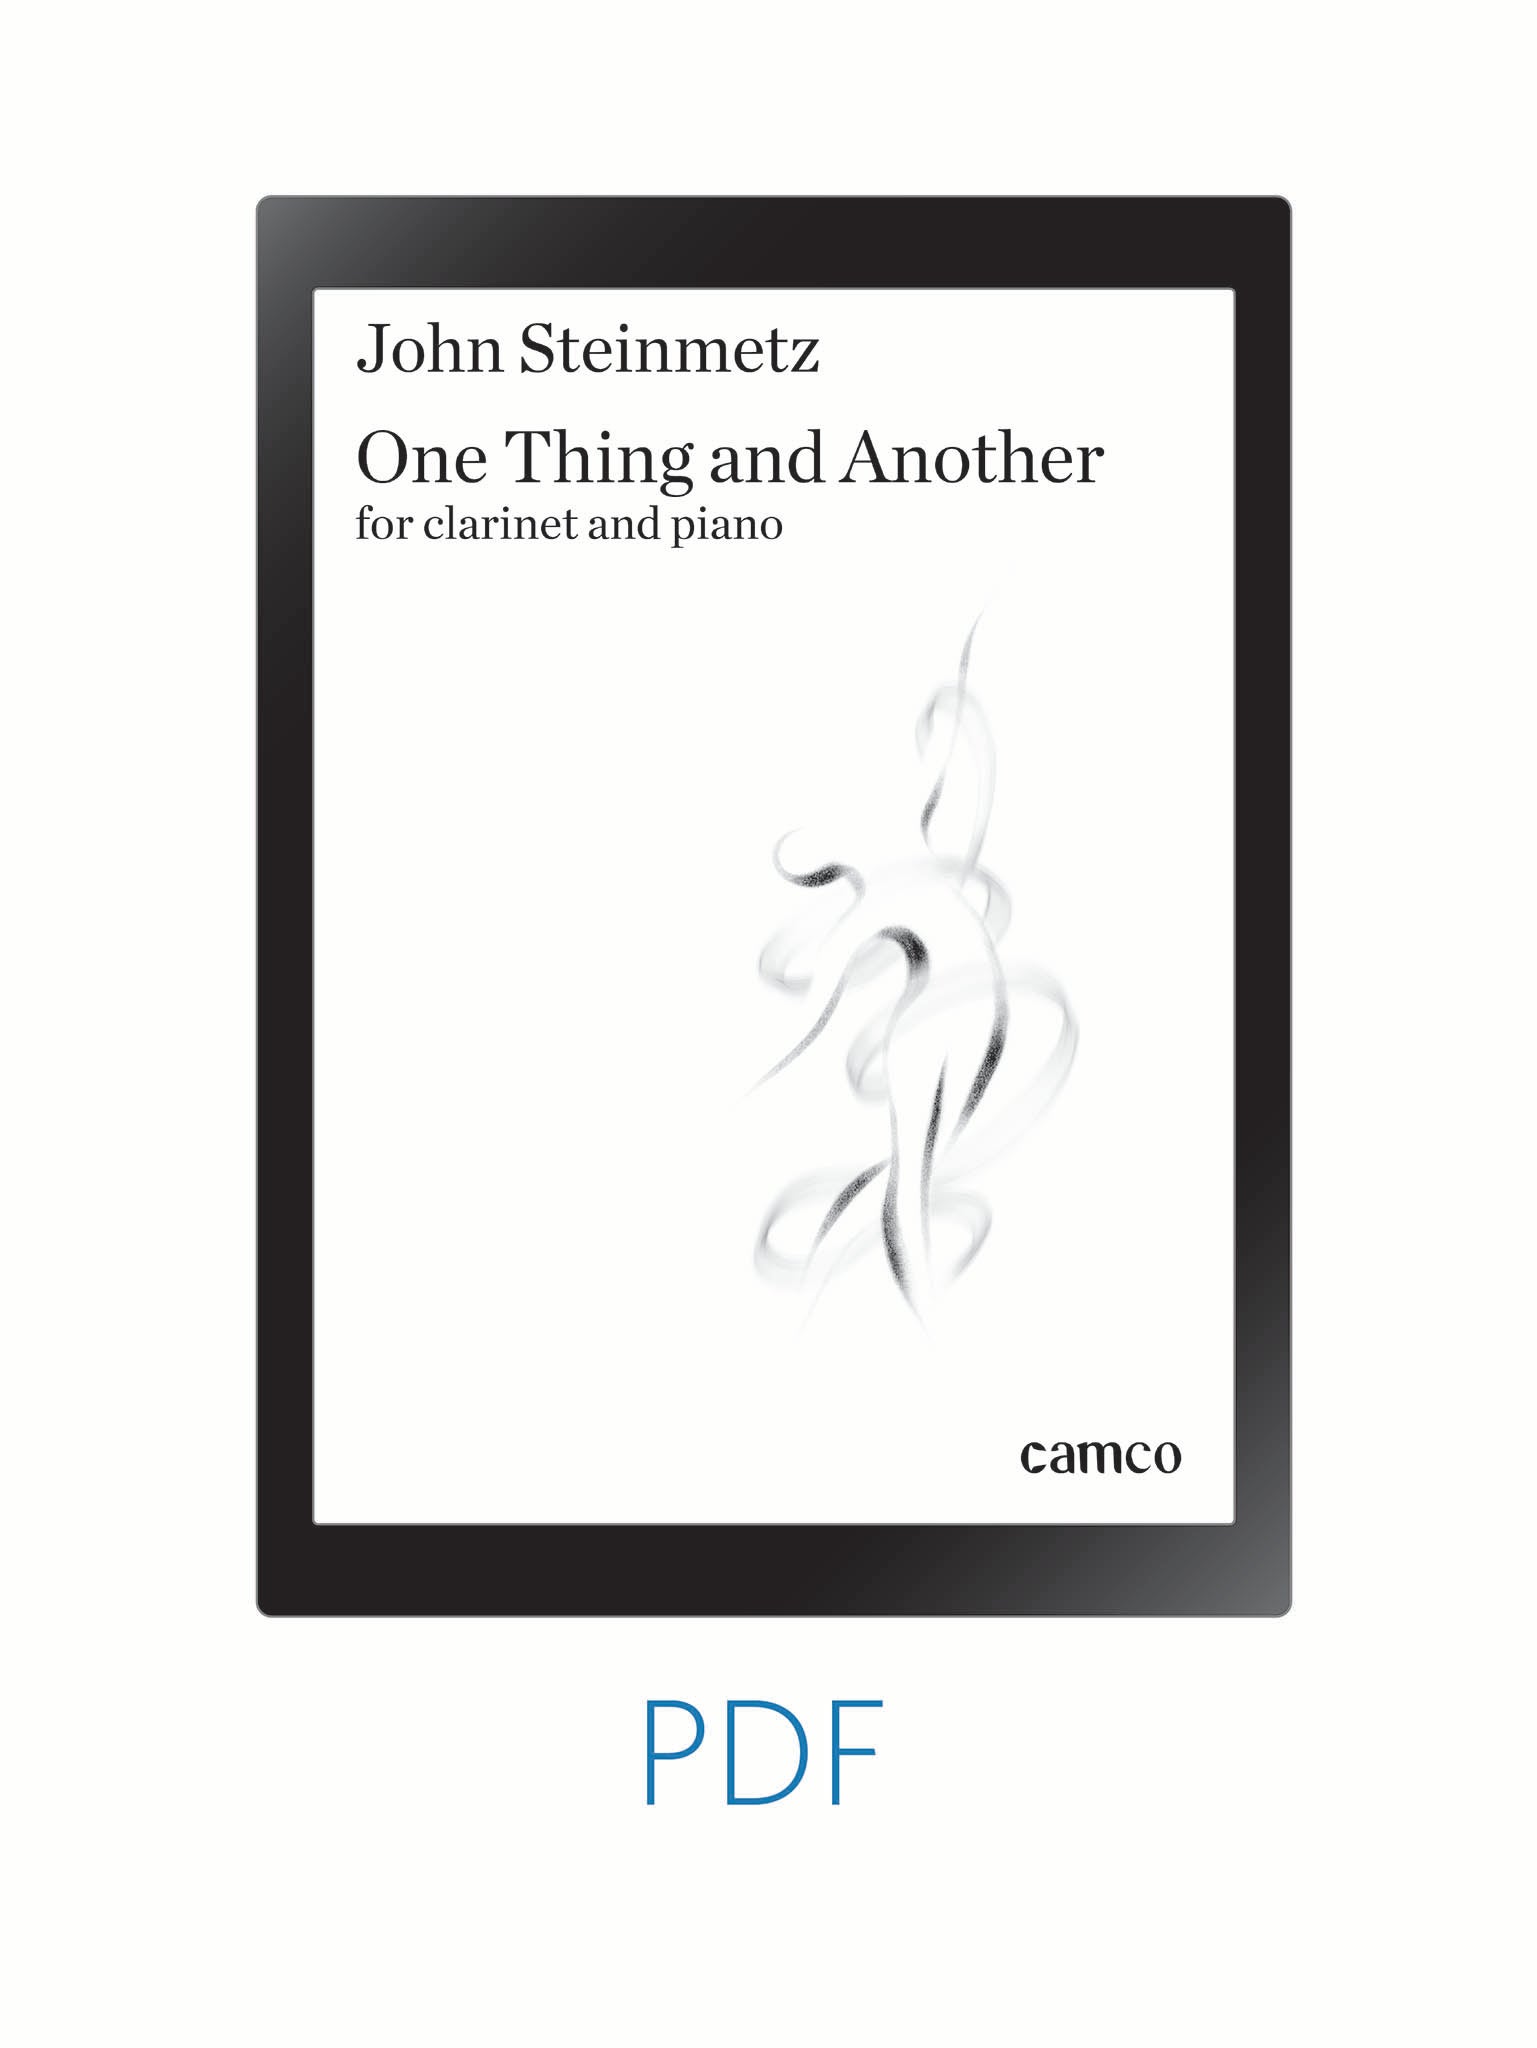 John Steinmetz One Thing and Another digital PDF format